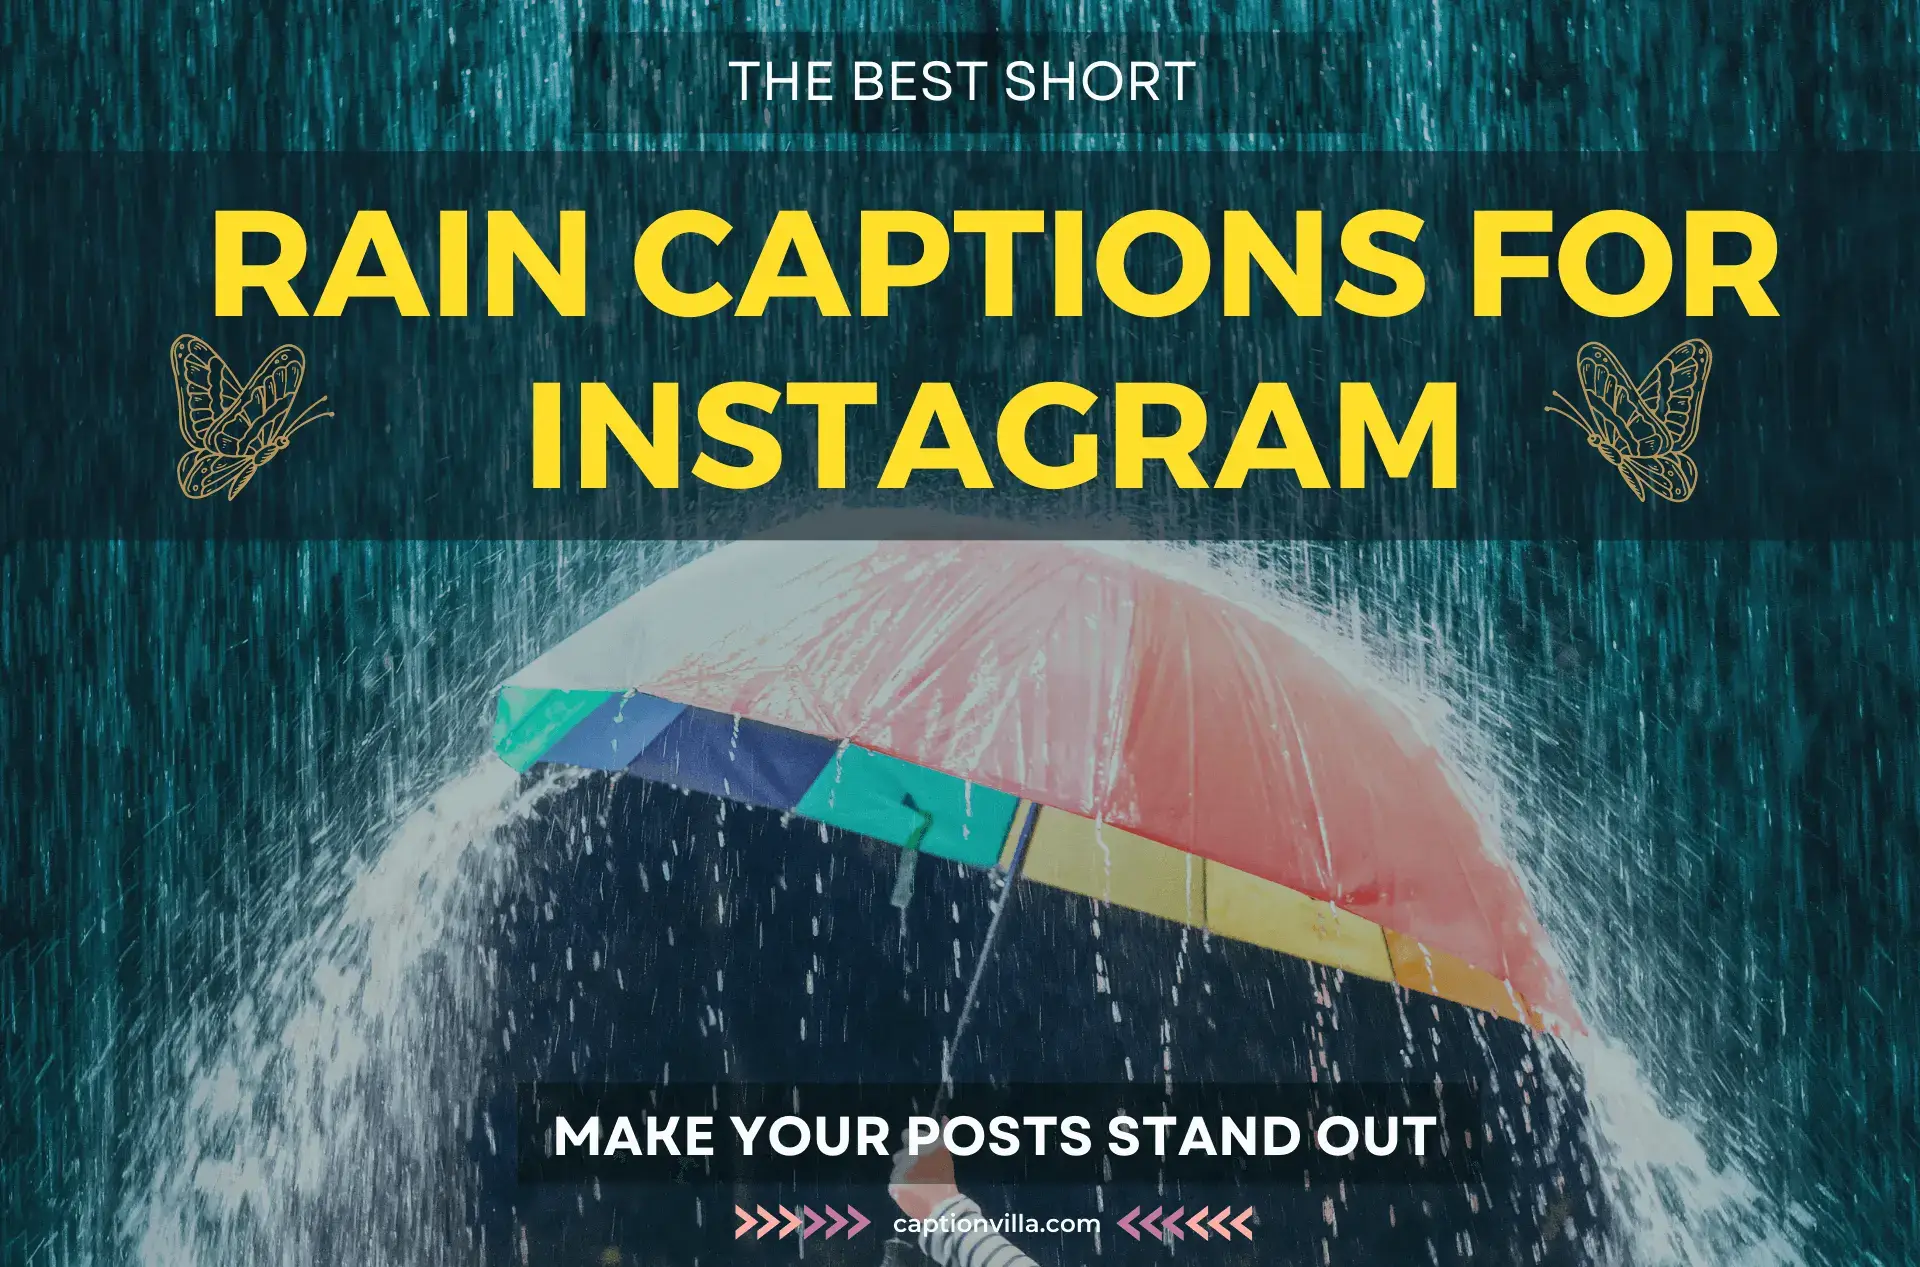 Rain failing loving photo with the title of rain captions for Instagram